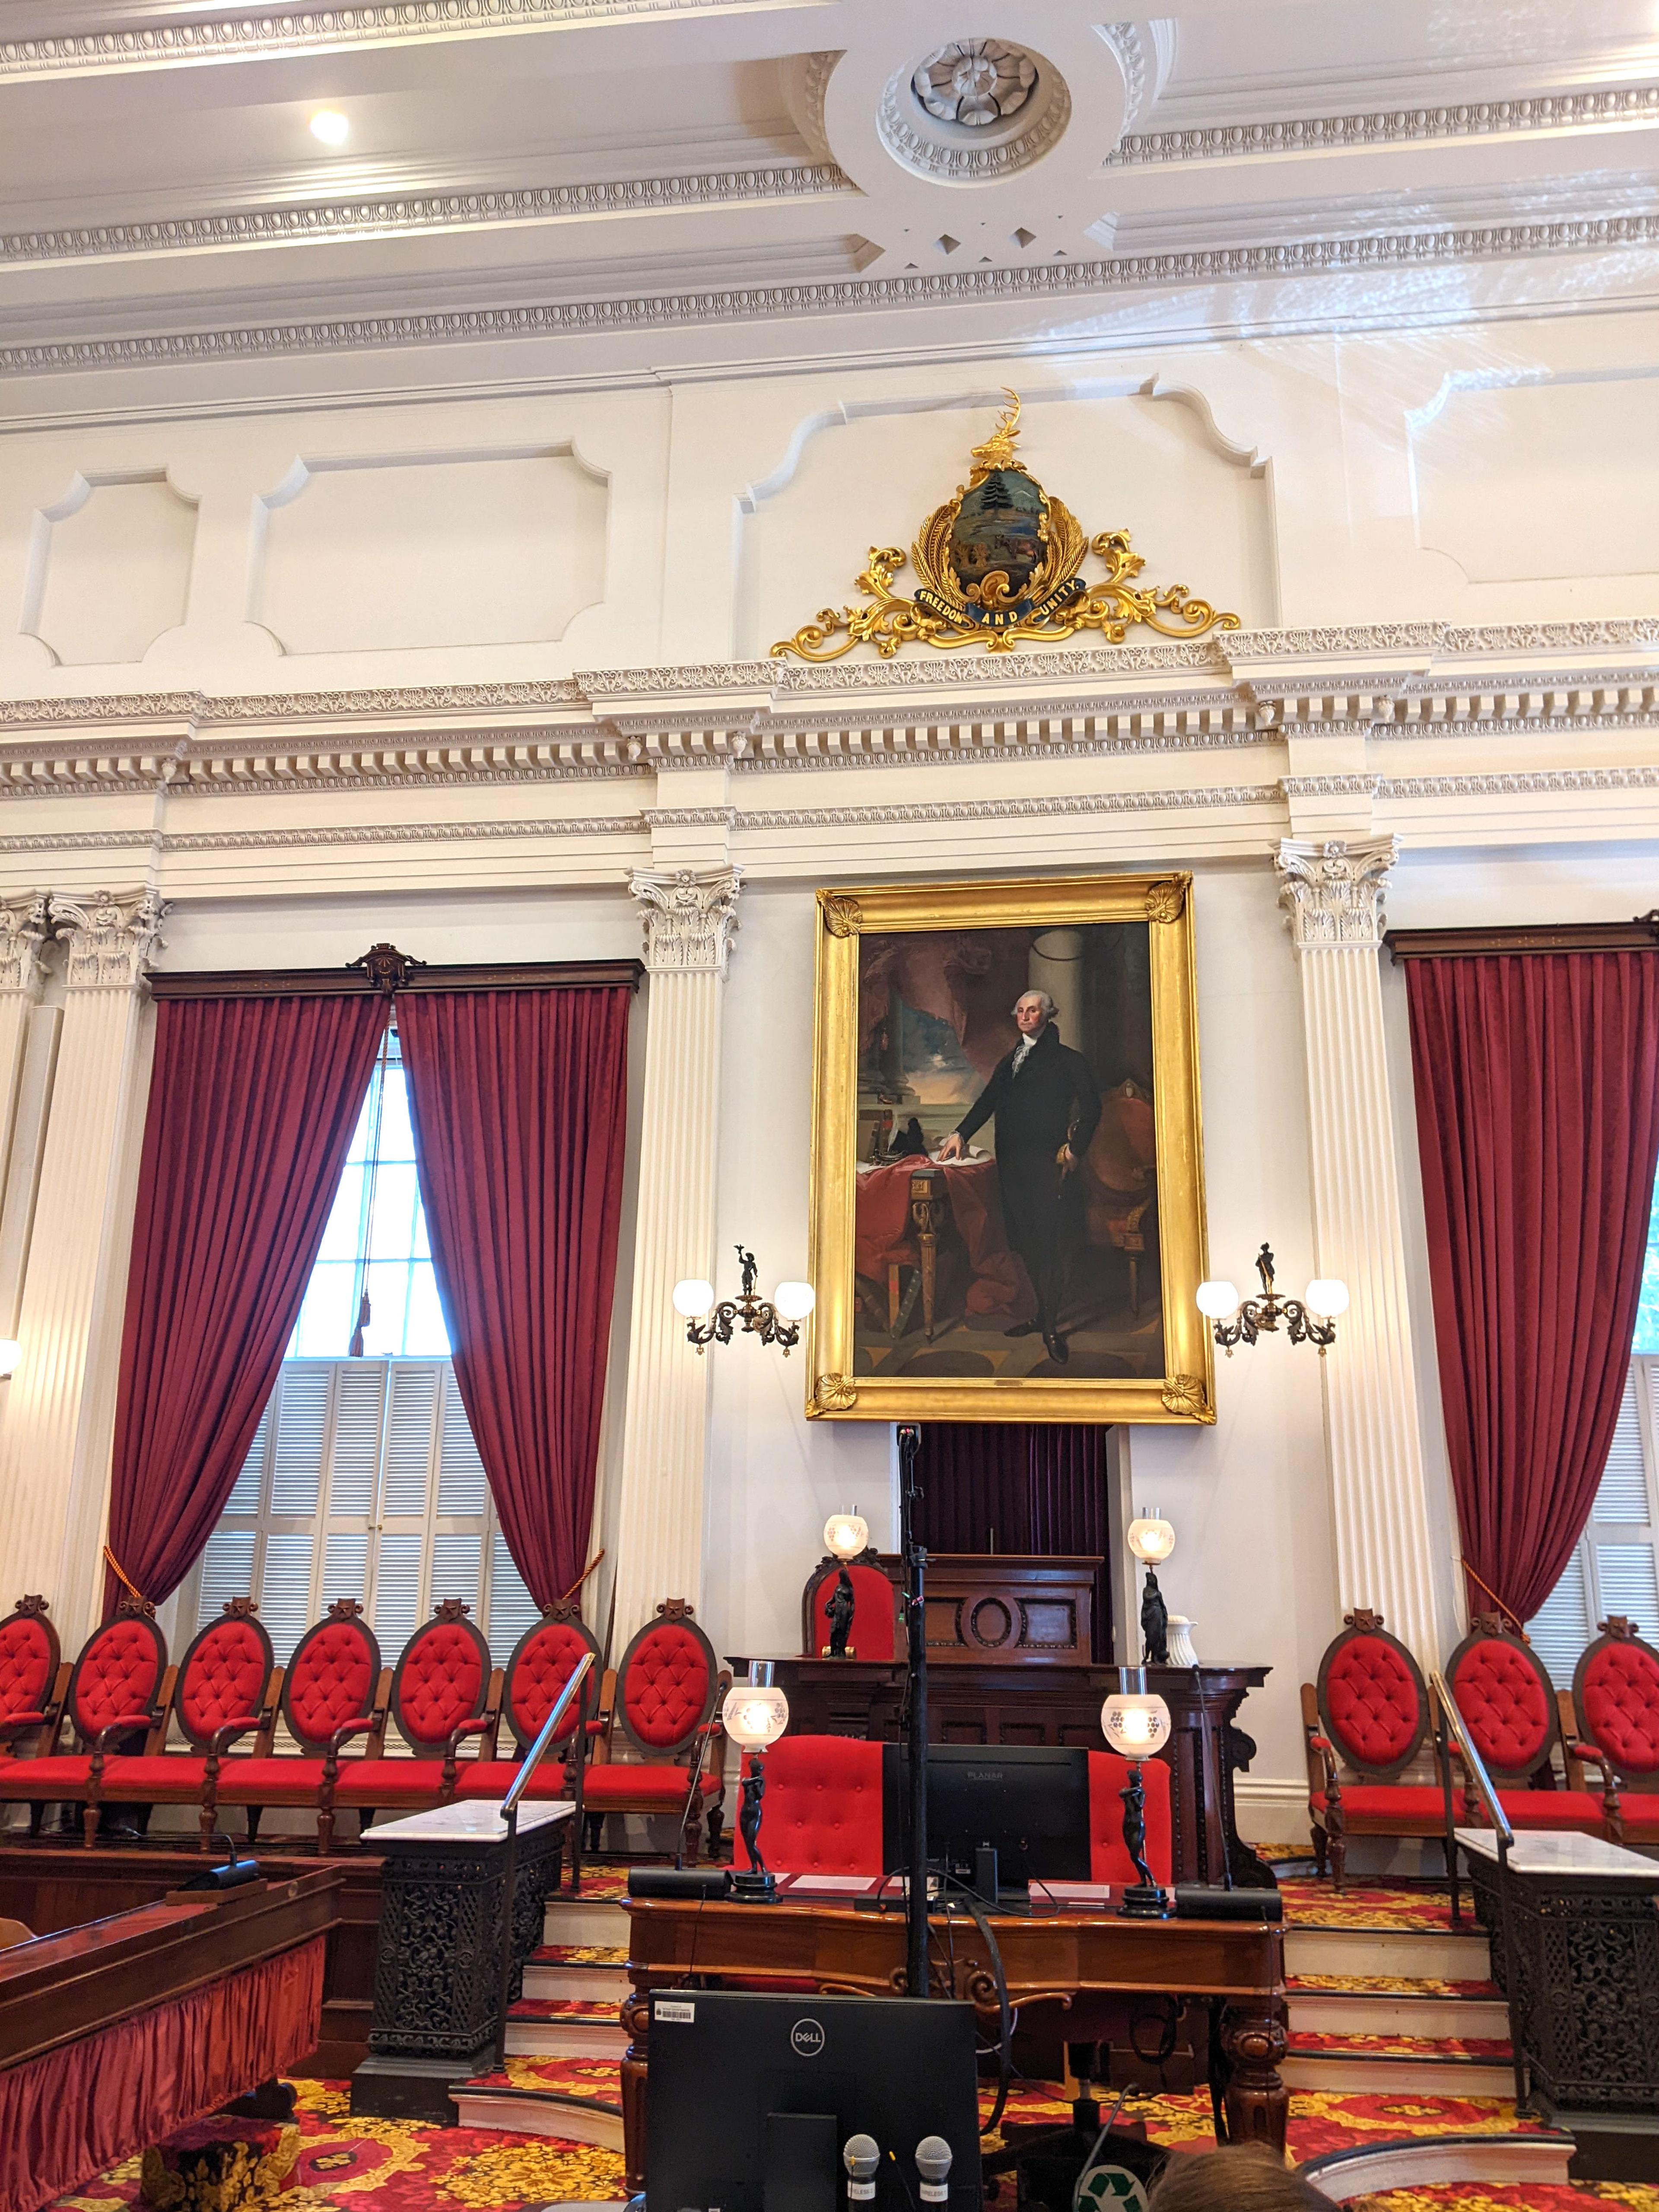 The podium inside the chamber